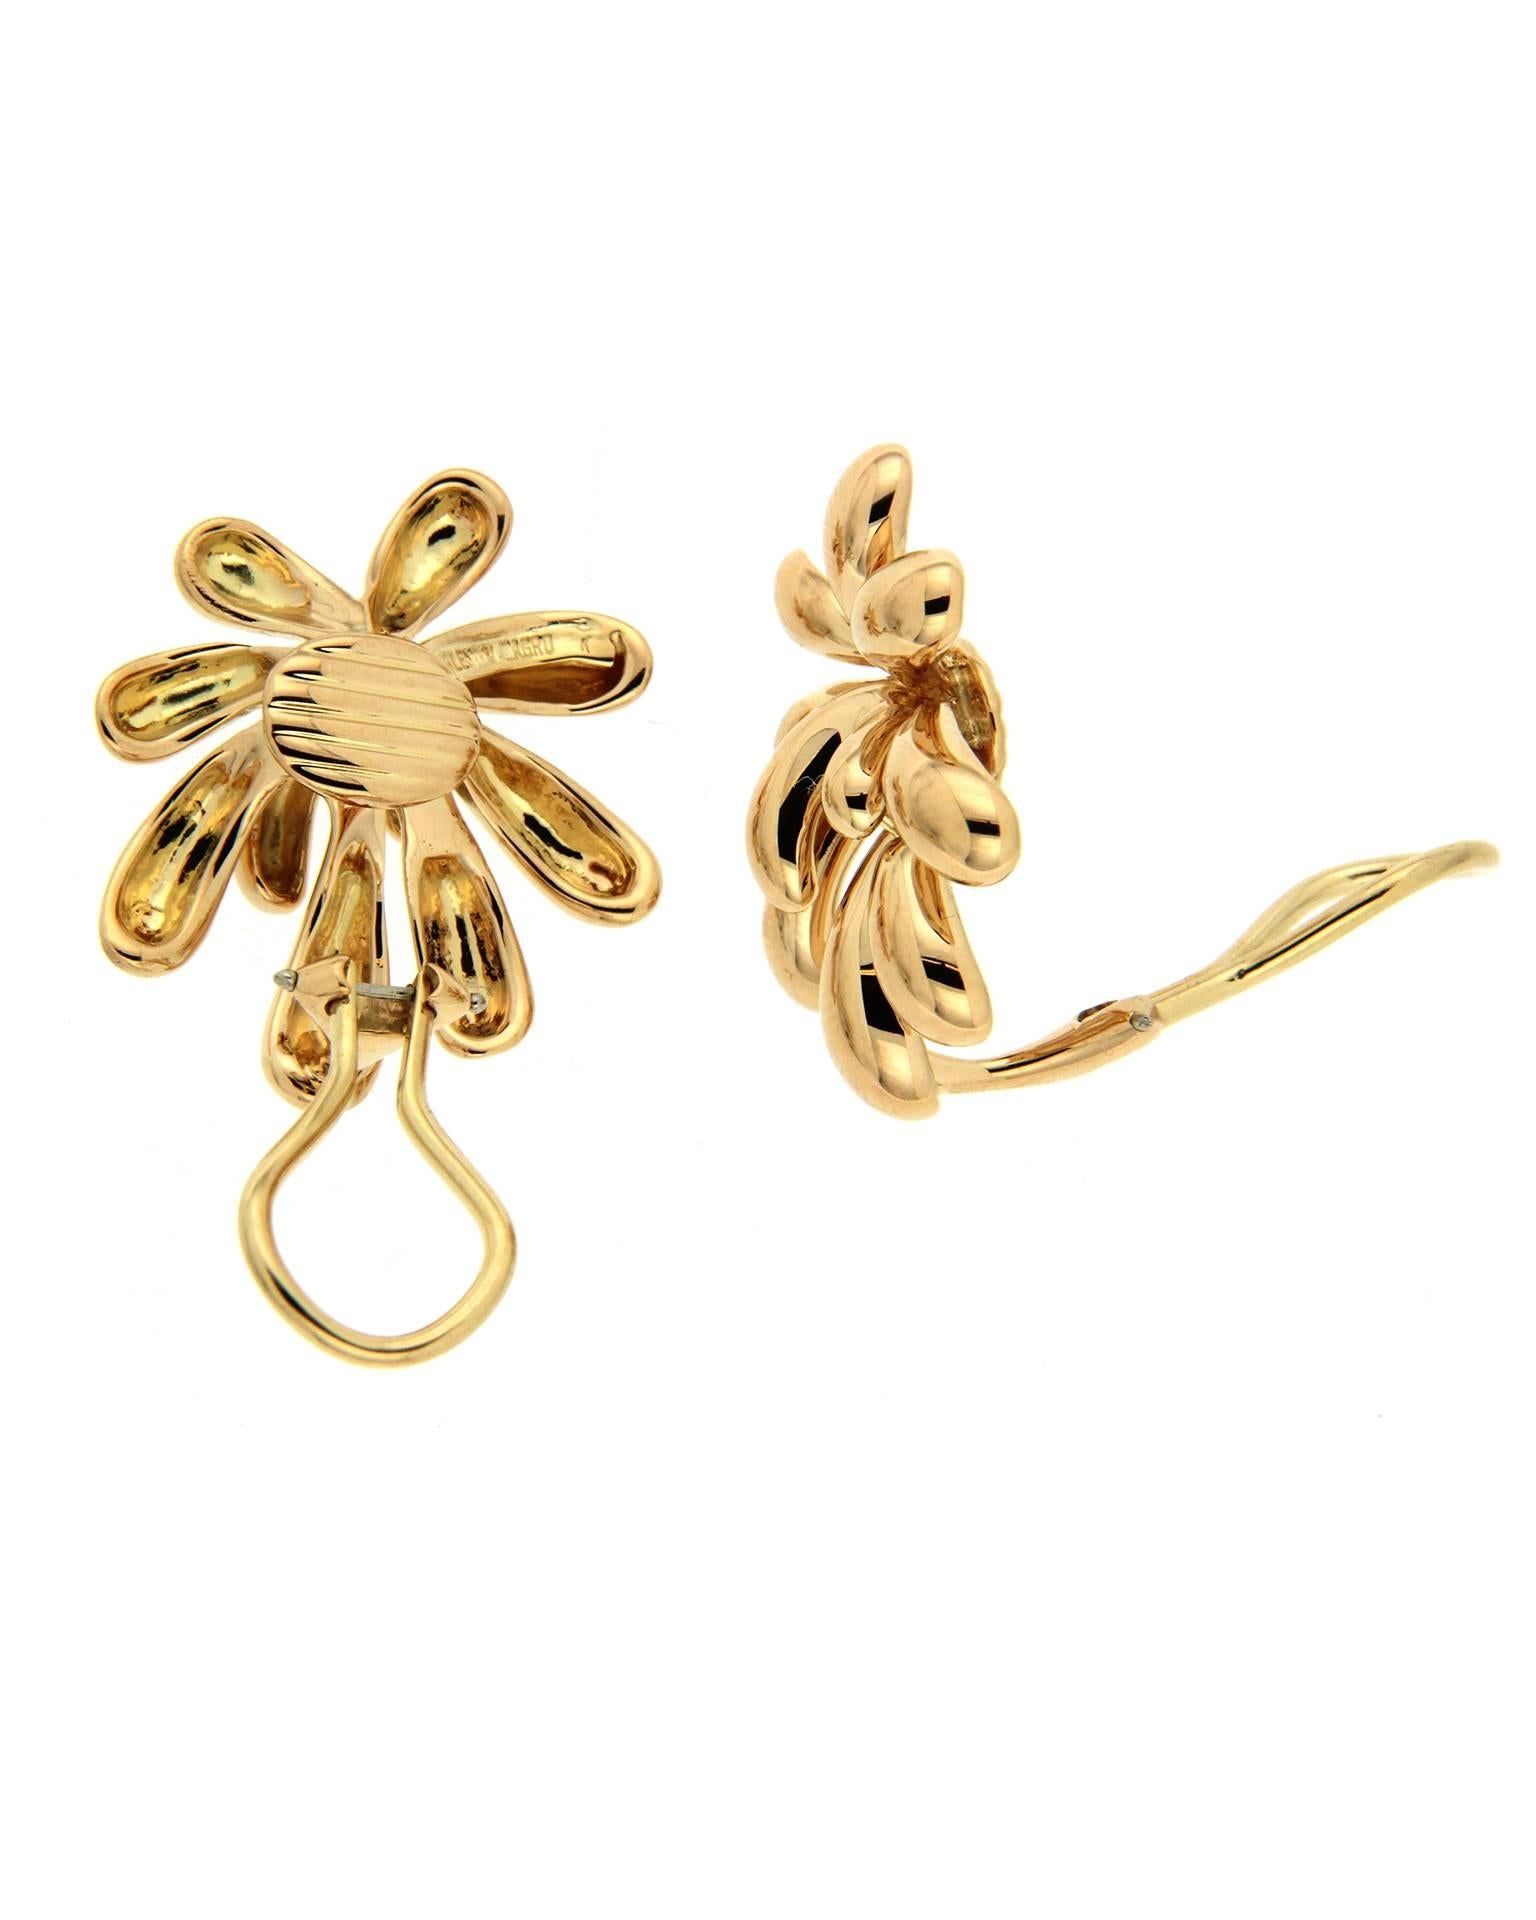 These earrings are made in 18kt yellow gold and are finished with clip-backs.